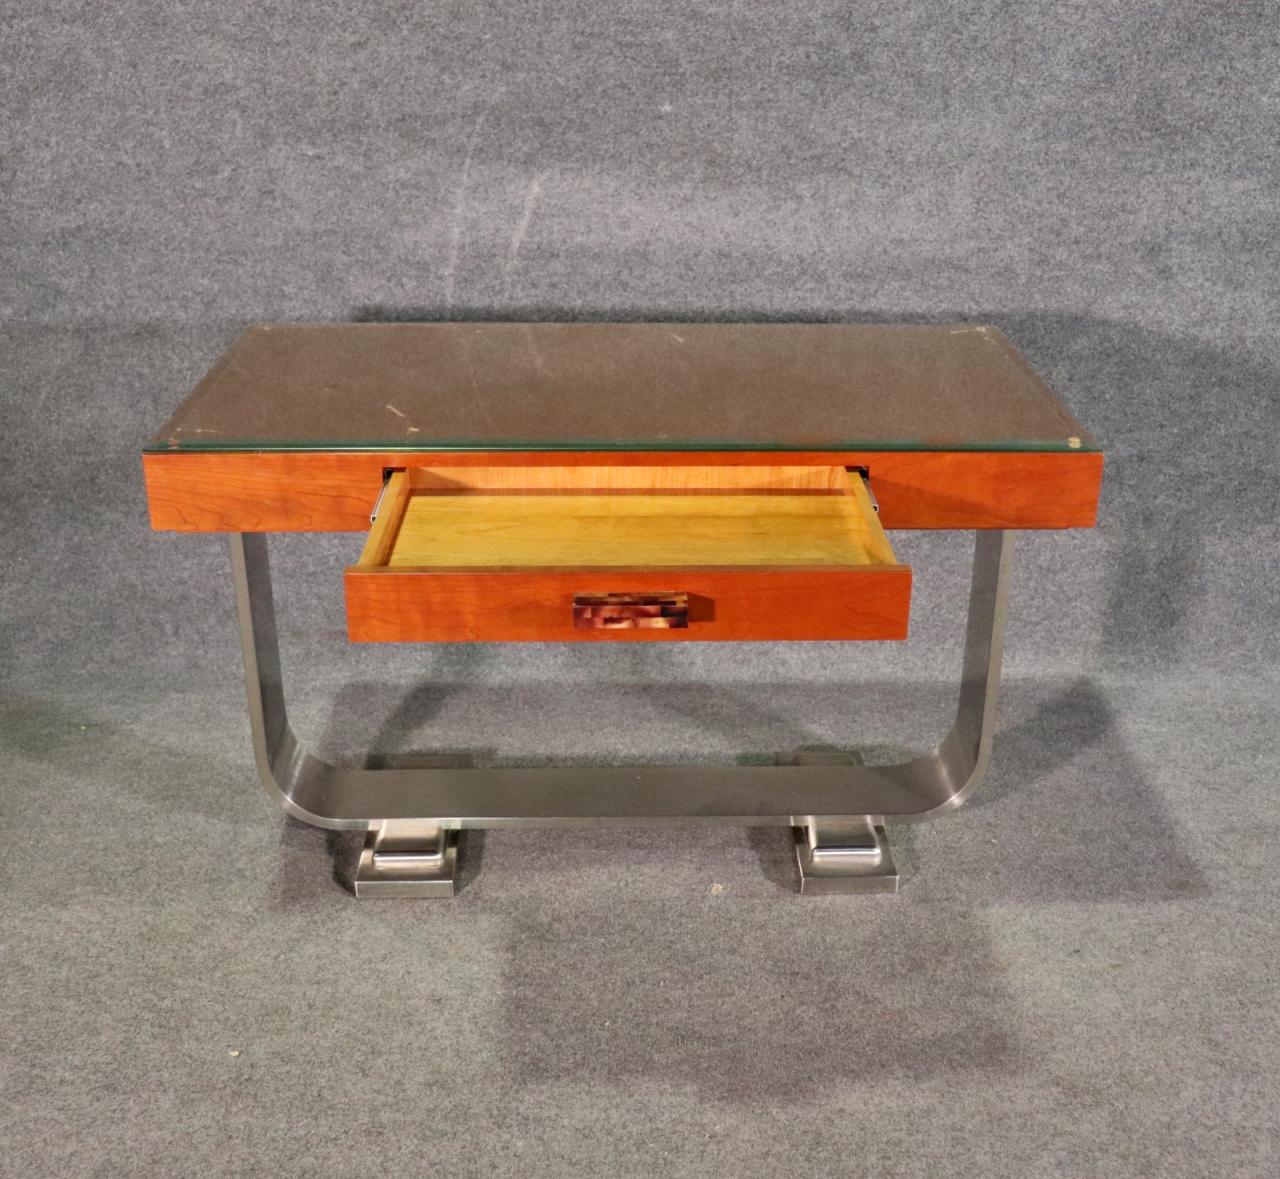 Deco style desk on aluminum metal base with single drawer. Glass top protector over the leather writing surface. Drawer has an attractive acrylic handle.
Please confirm location NY or NJ